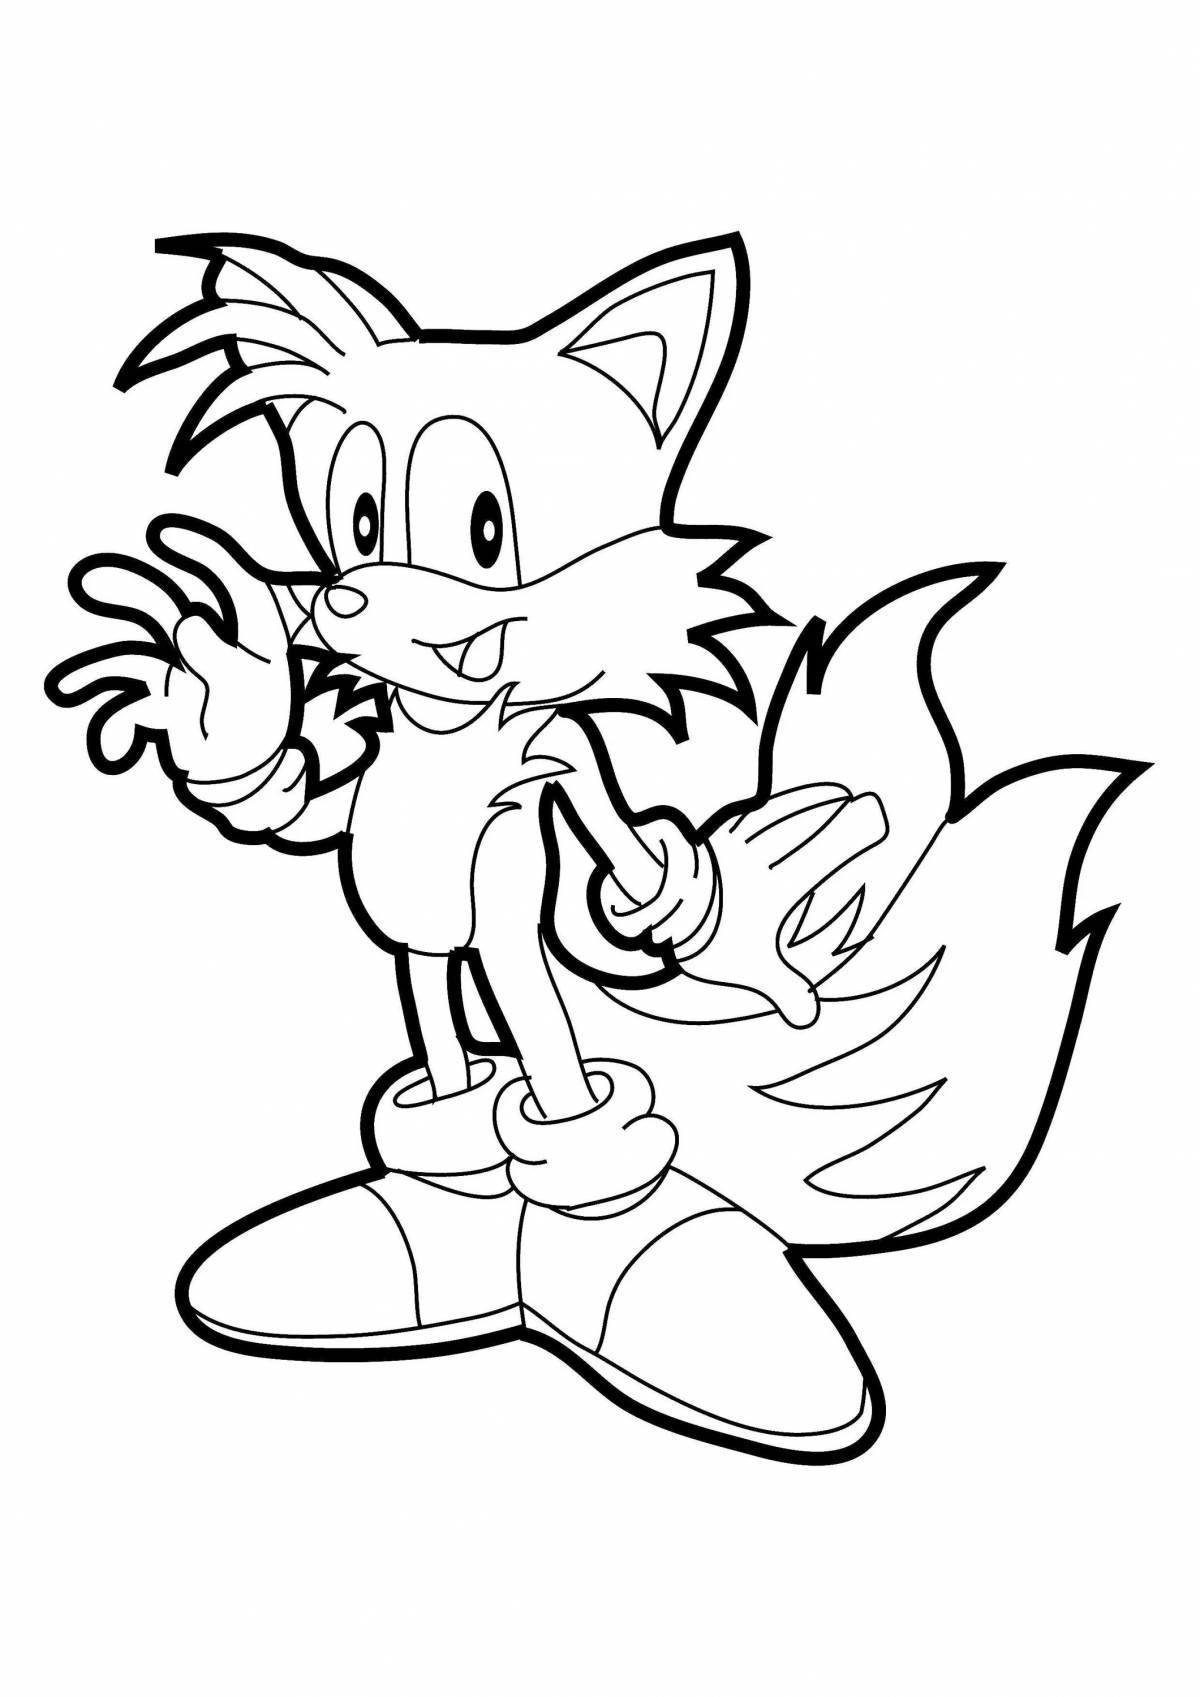 Miles tails prower's joyful coloring